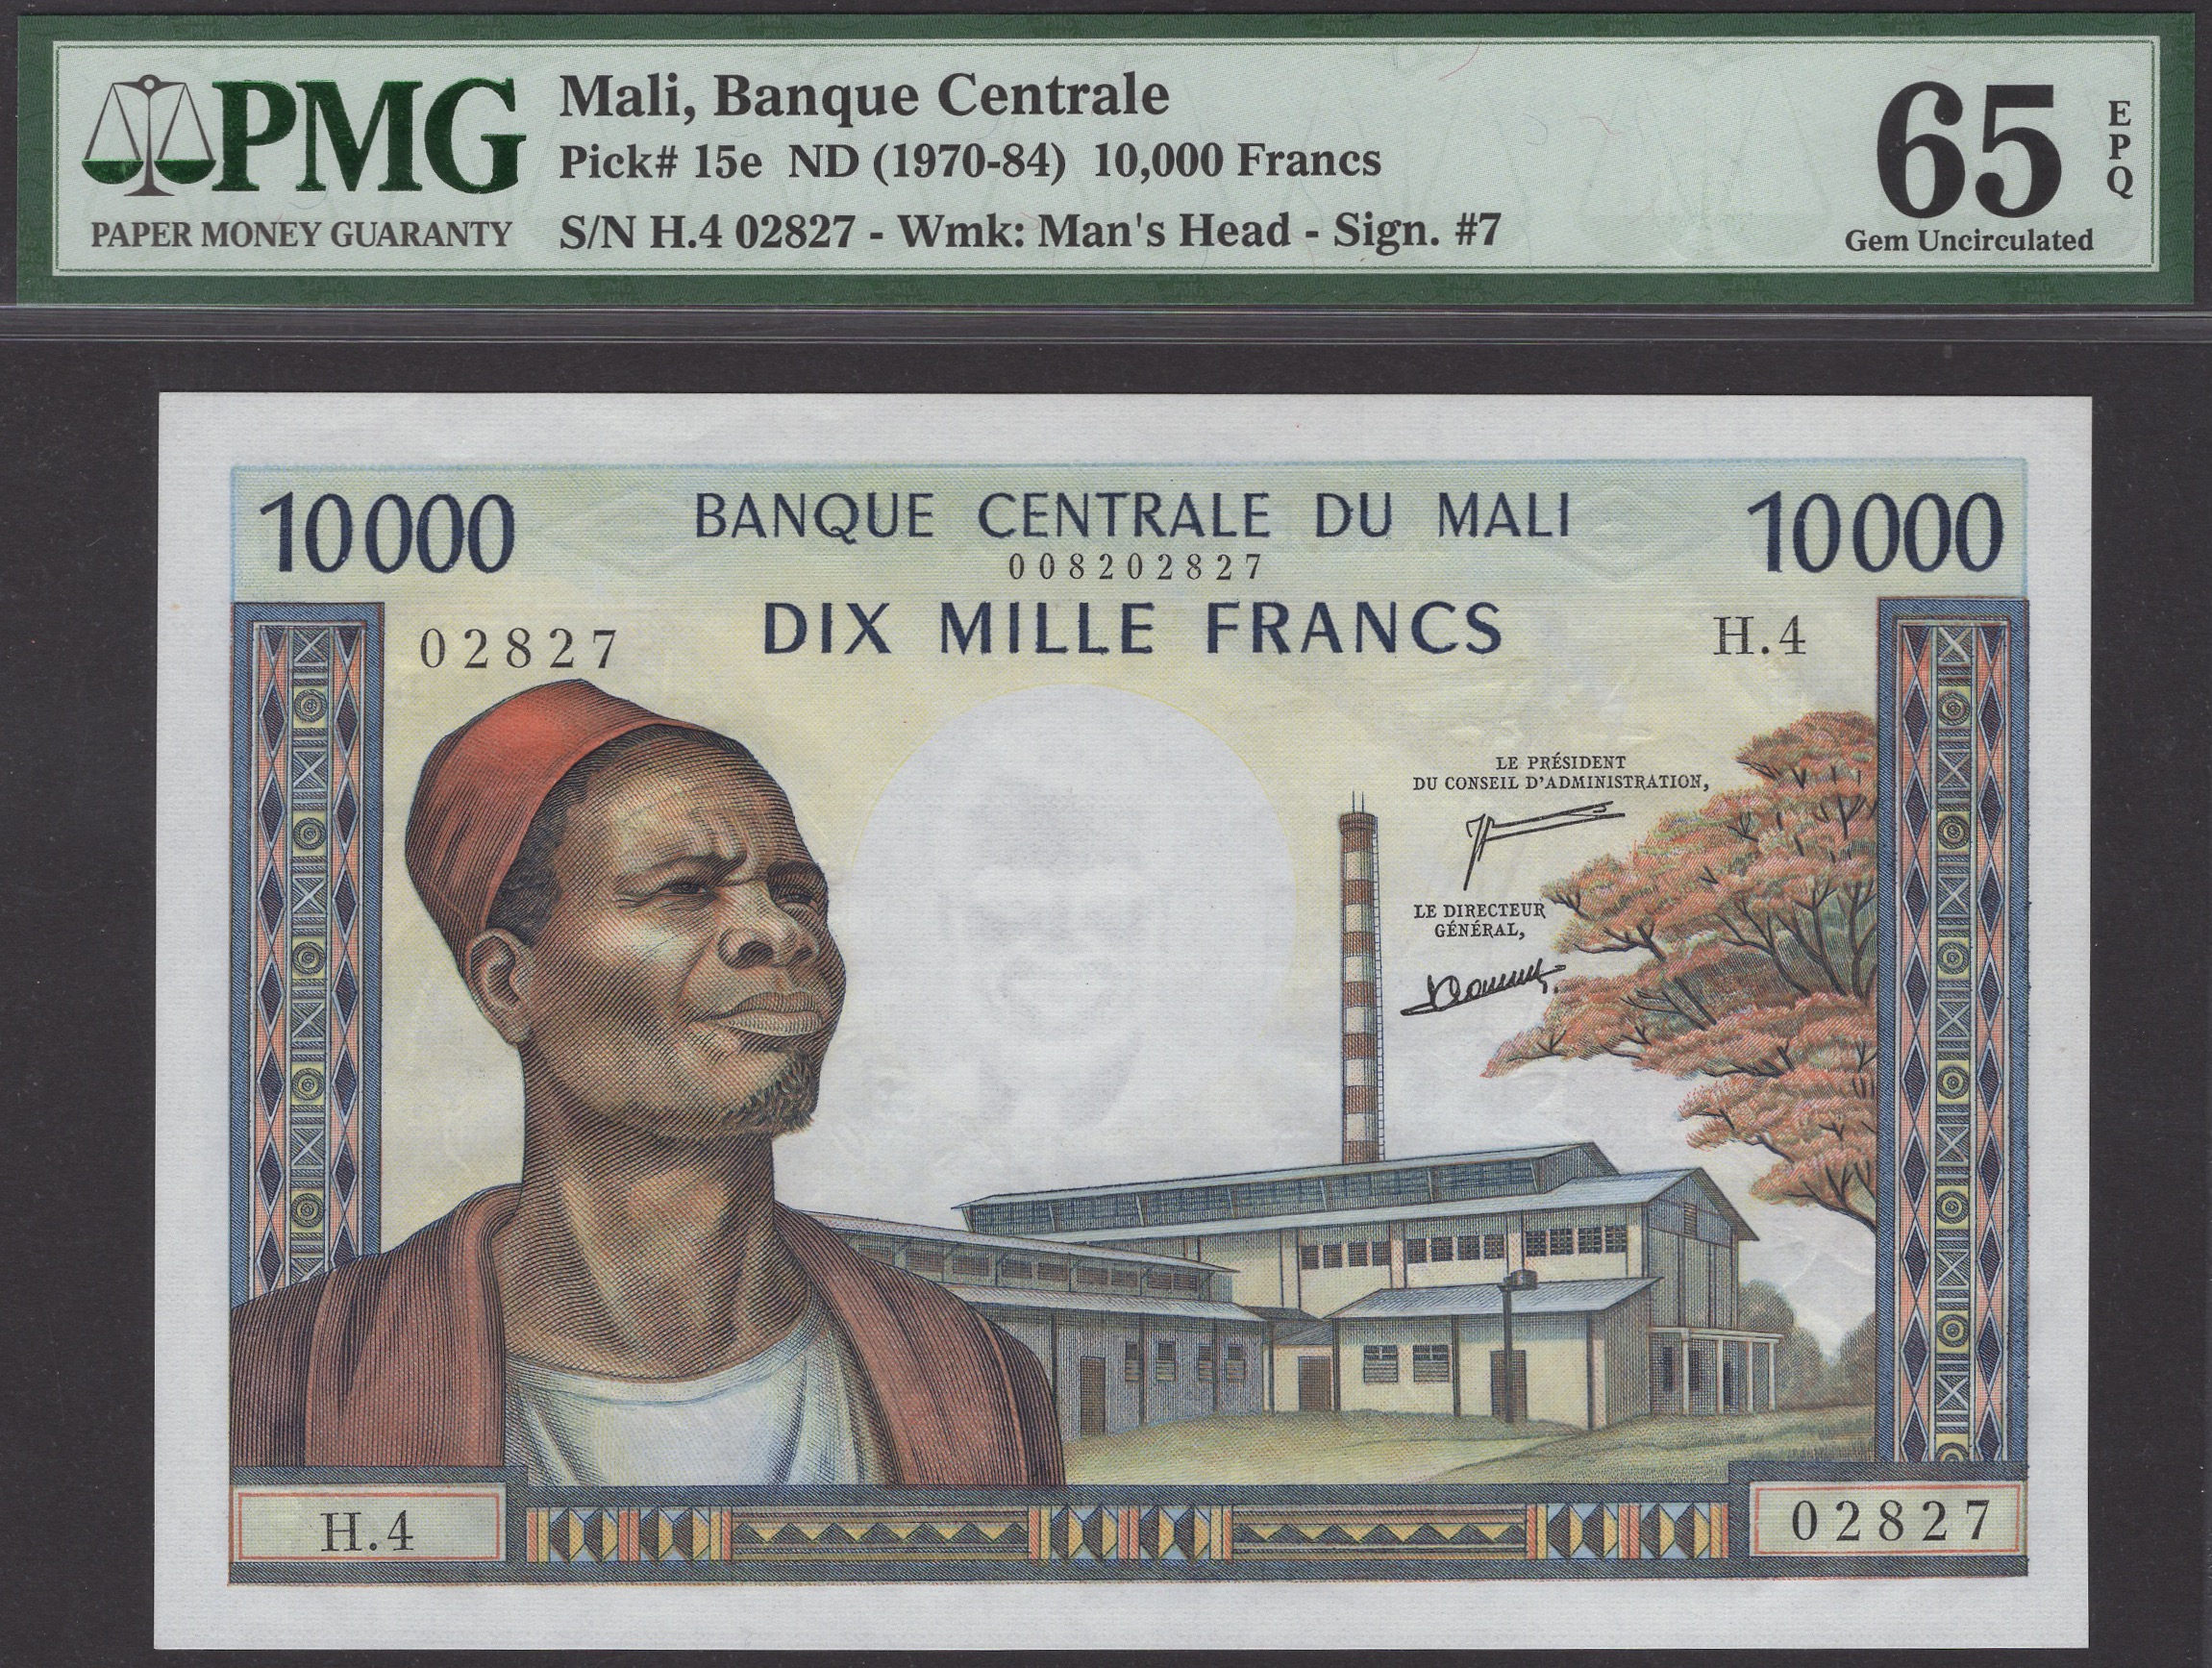 Banque Centrale du Mali, 10000 Francs, ND (1970), serial number H.4 02827, Clary and M'ba...